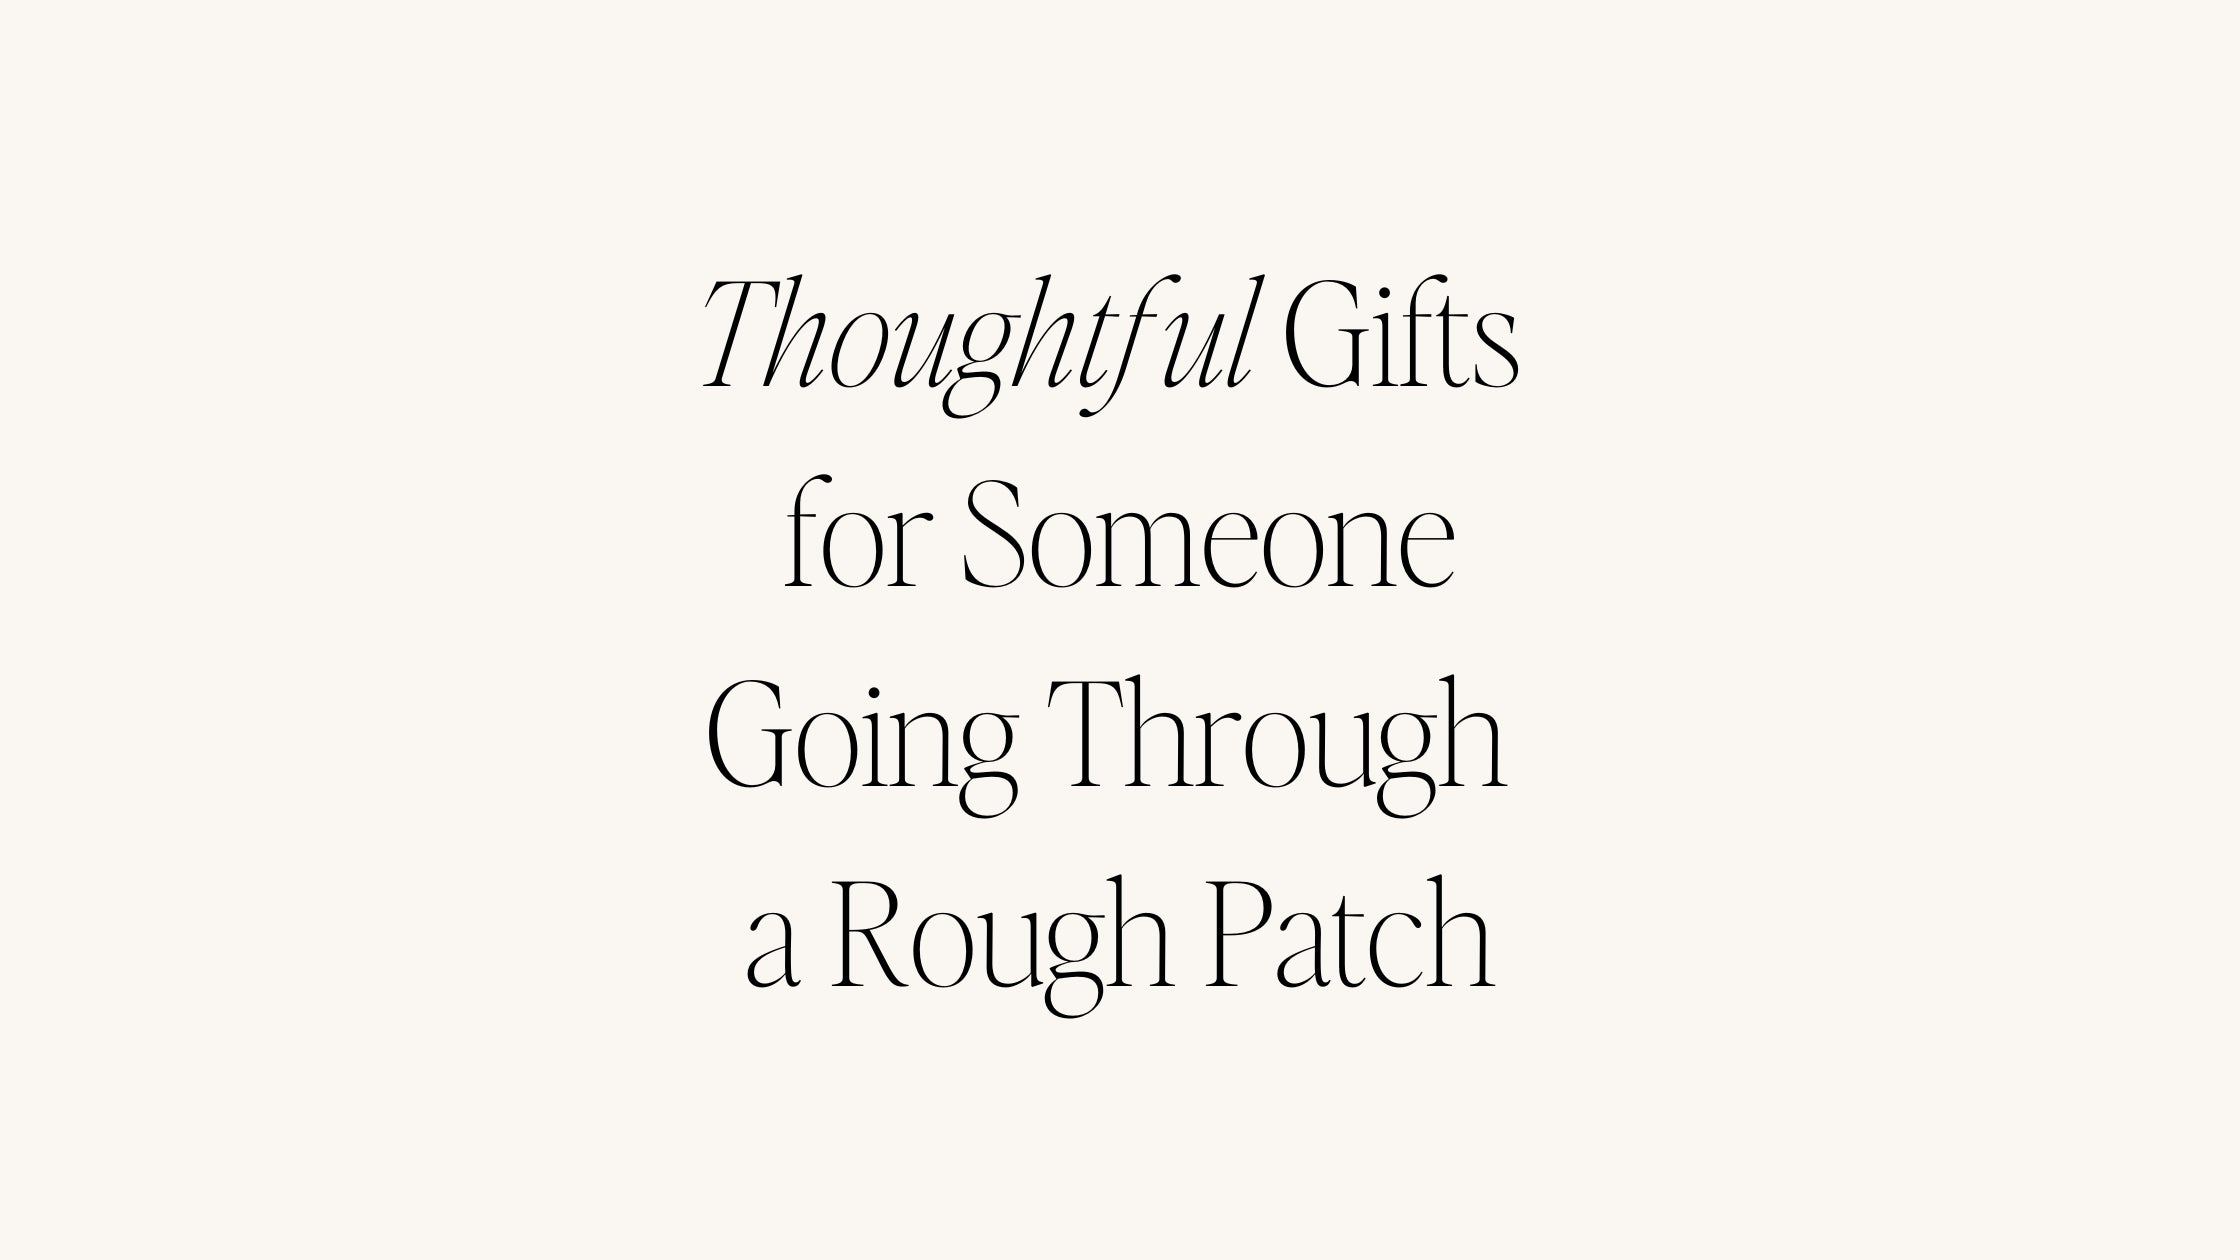 Thoughtful Gifts for Someone Going Through a Rough Patch